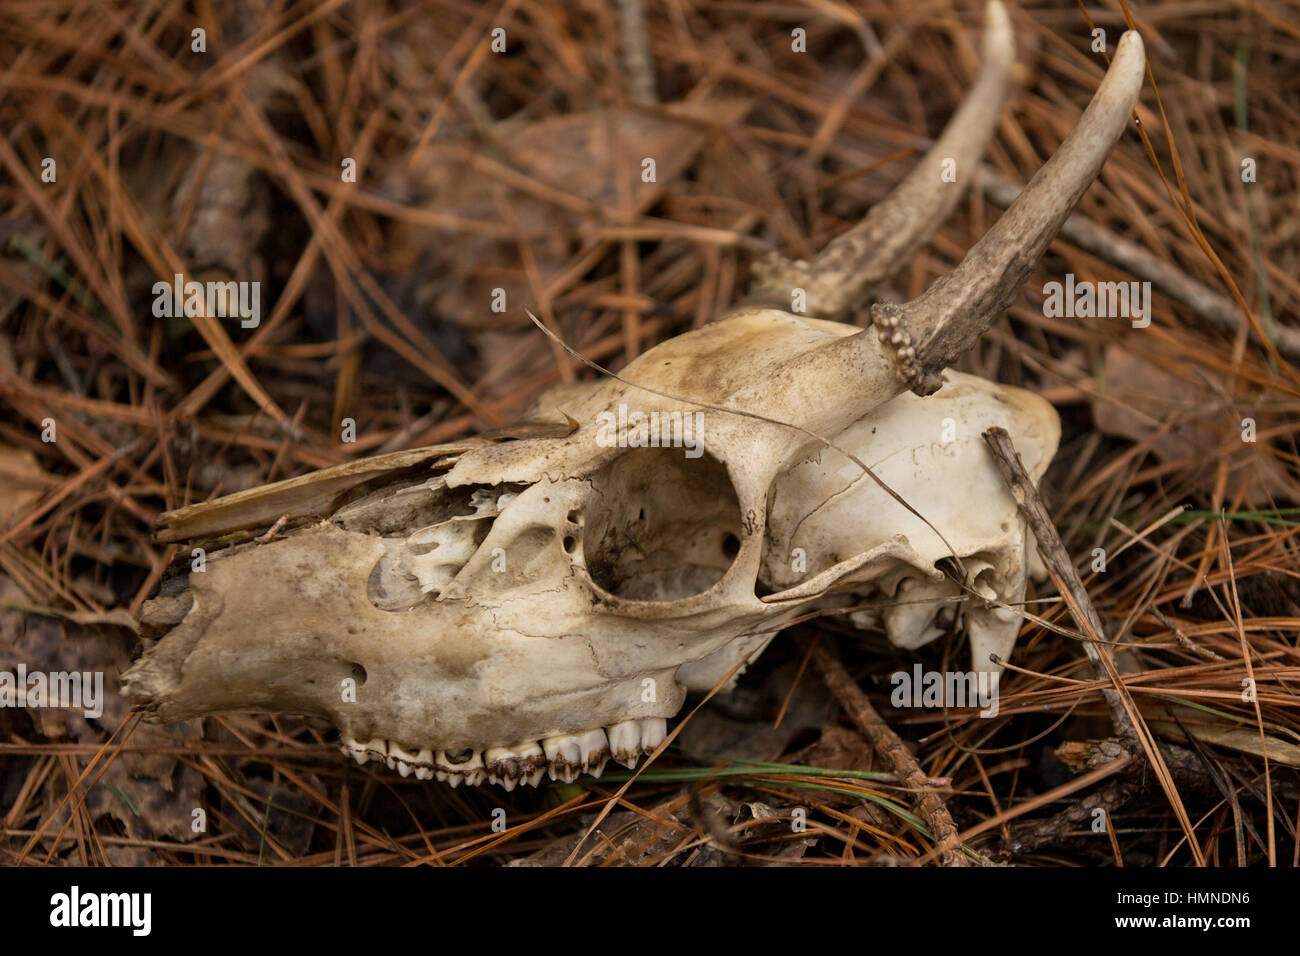 A deer skull found in decay in the woods in North Carolina. Stock Photo